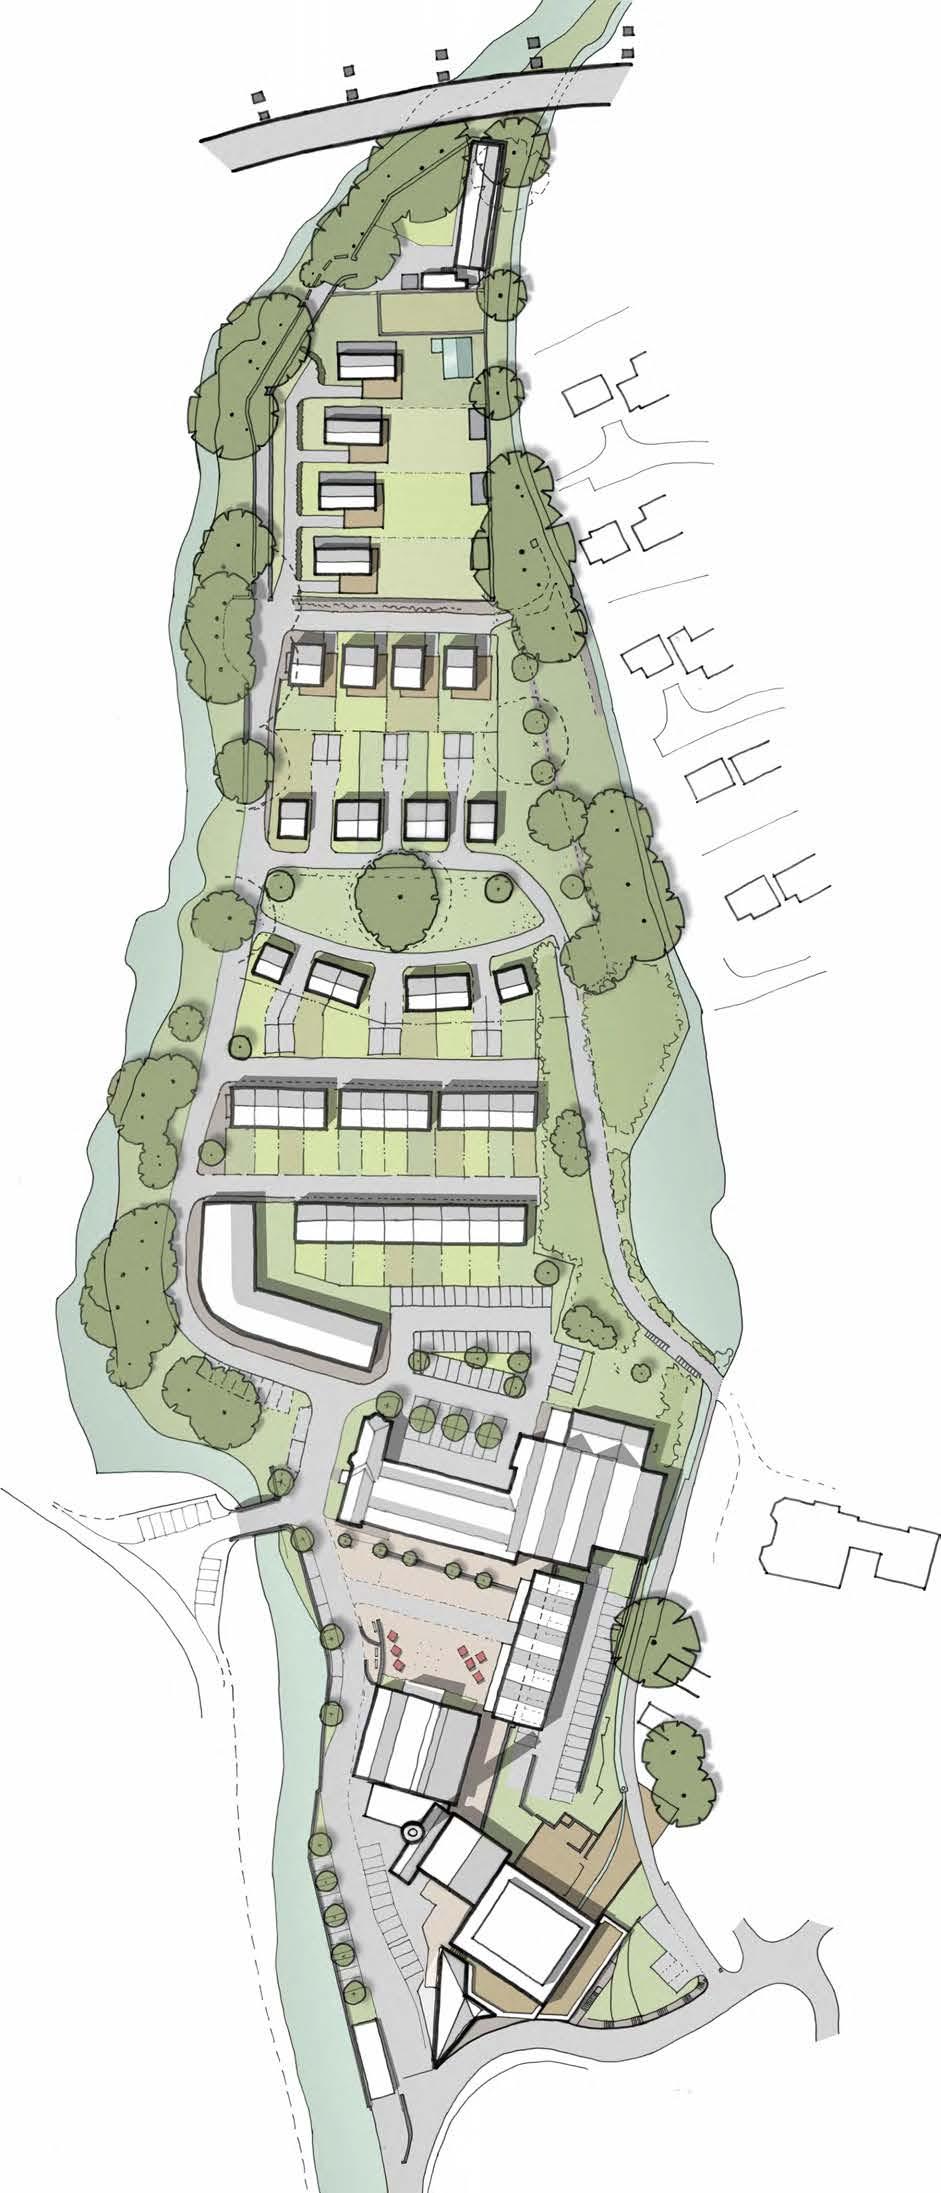 Stowford Mill, Ivybridge Illustrative Masterplan N 1 1 Farm (Refurbishment) Convert existing into: 1 no 6 bed, 2 storey dwelling 1 no 1 bed single storey annex for Guest House & Leisure (Class Use